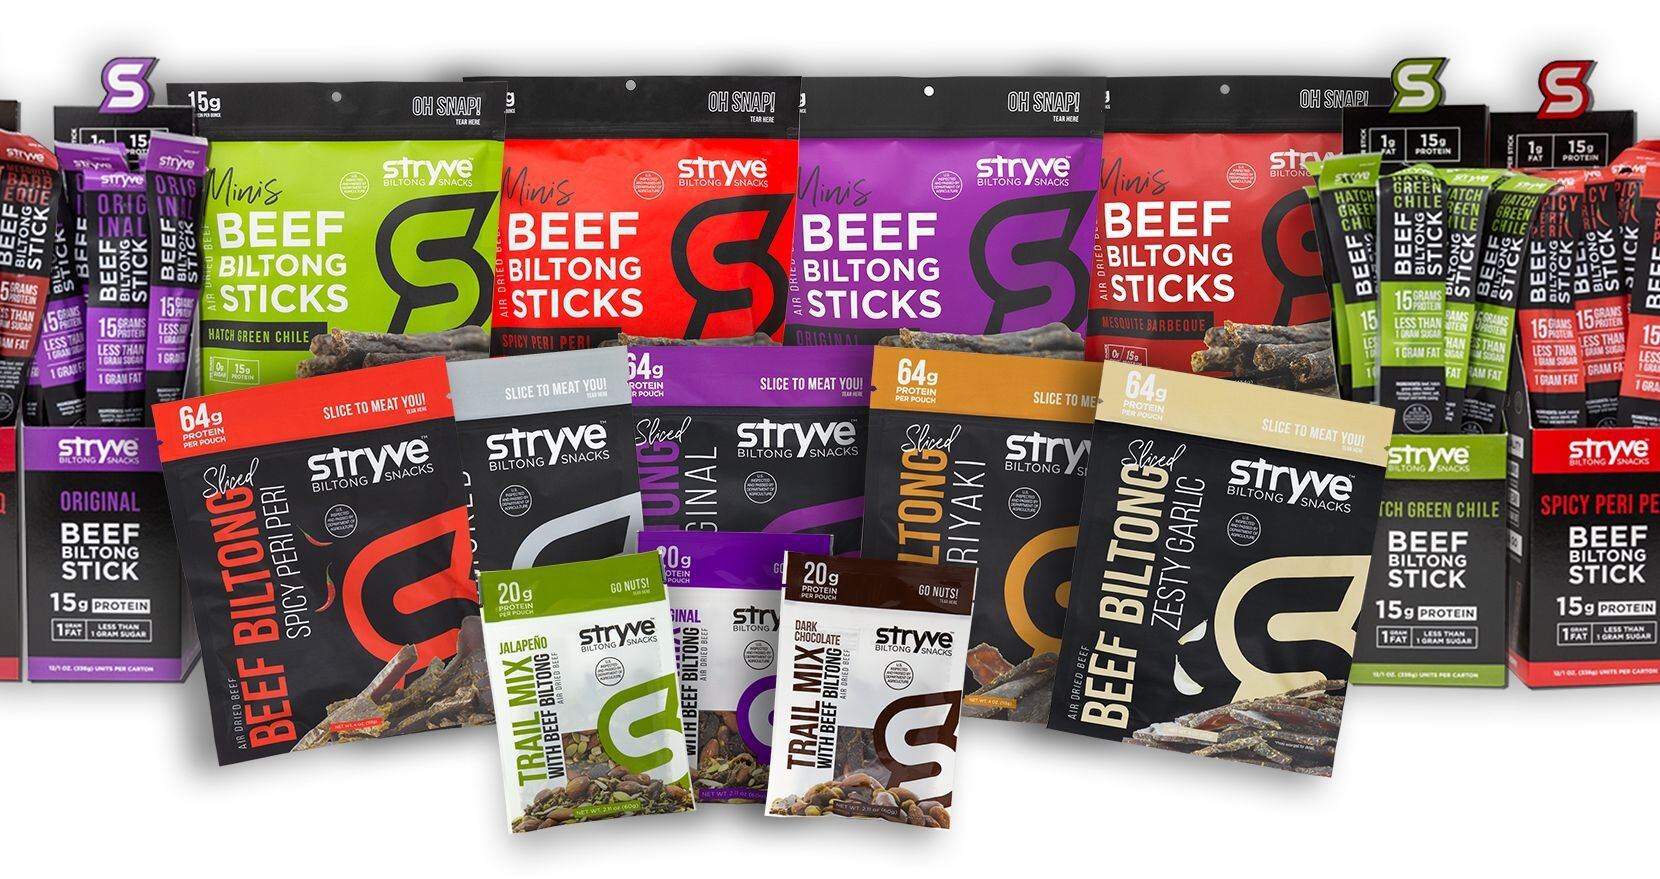 Stryve Biltong products